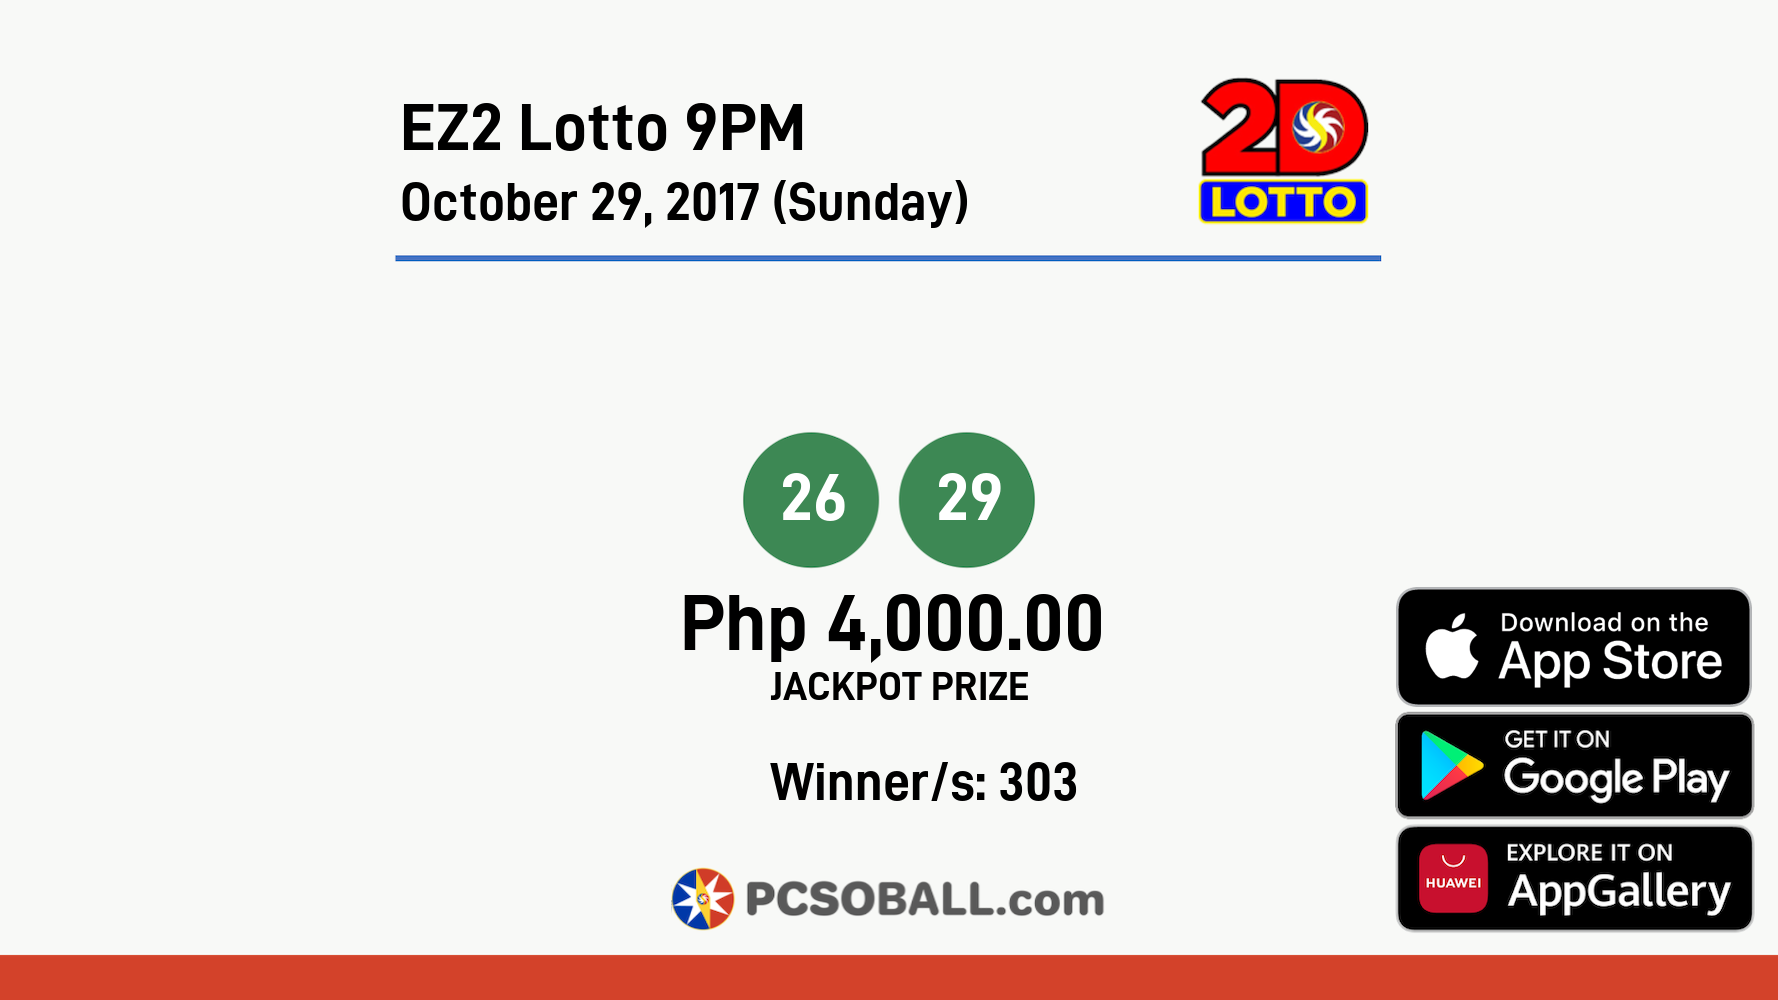 EZ2 Lotto 9PM October 29, 2017 (Sunday) Result